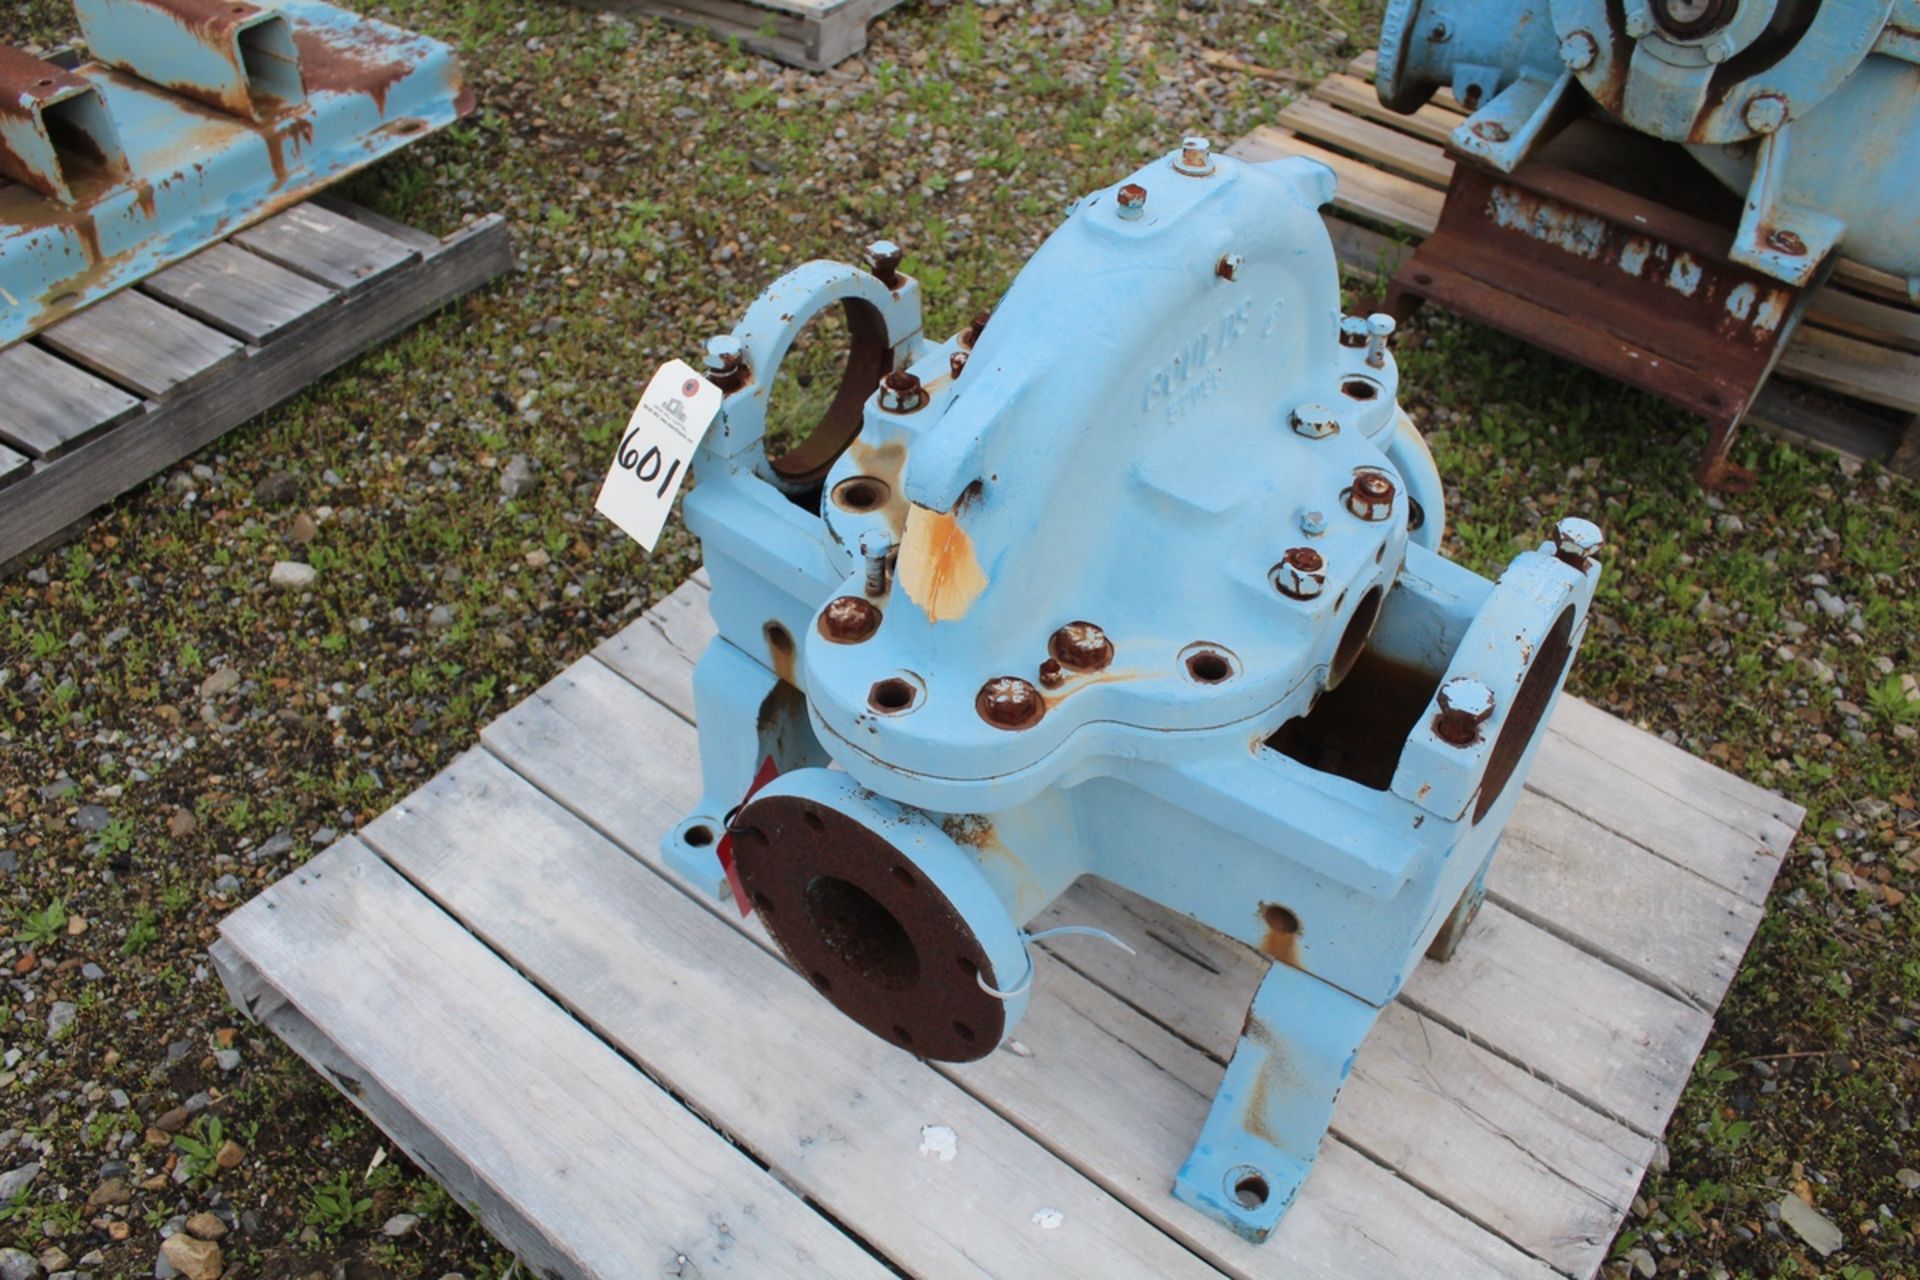 Goulds 3405M split case pump 4x6-14, Iron, casing only, Pattern # 52098 and 52097 | Load Fee: $5